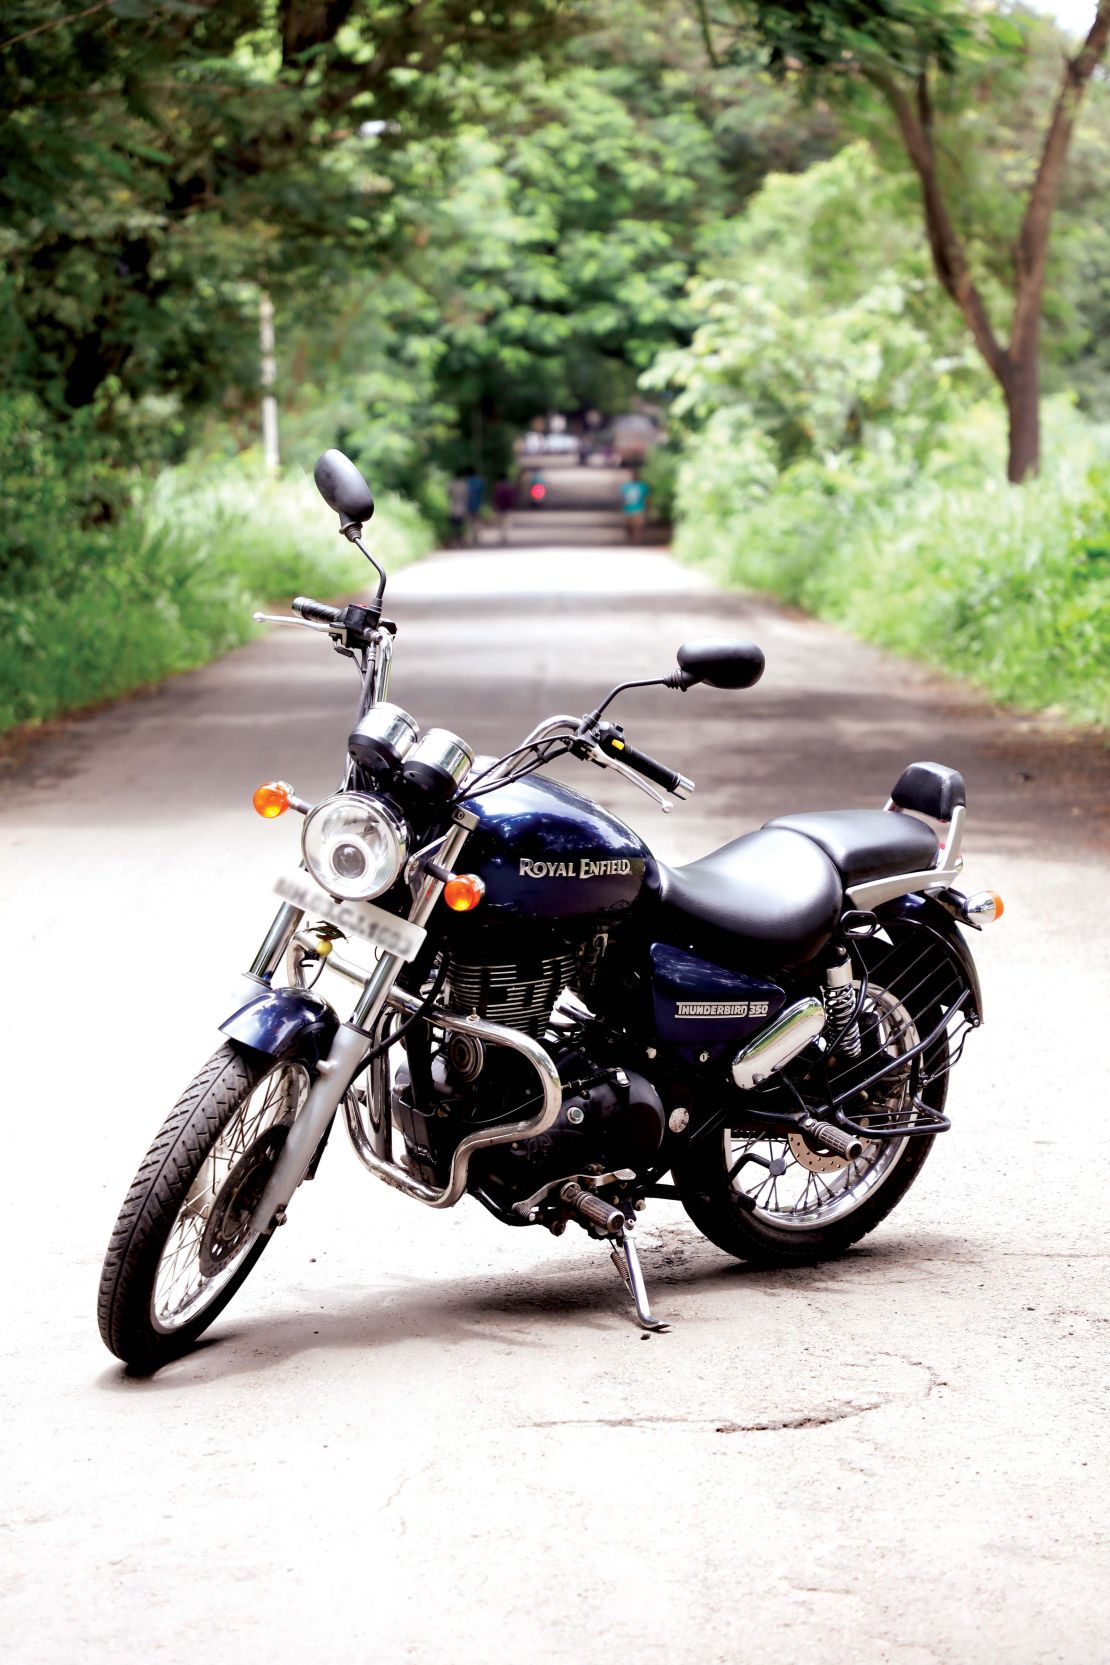 The Royal Enfield Bullet was originally popular among the military and police in India, but now is more popular among civilians. To date, more than half of Bullet riders are under thirty years old.